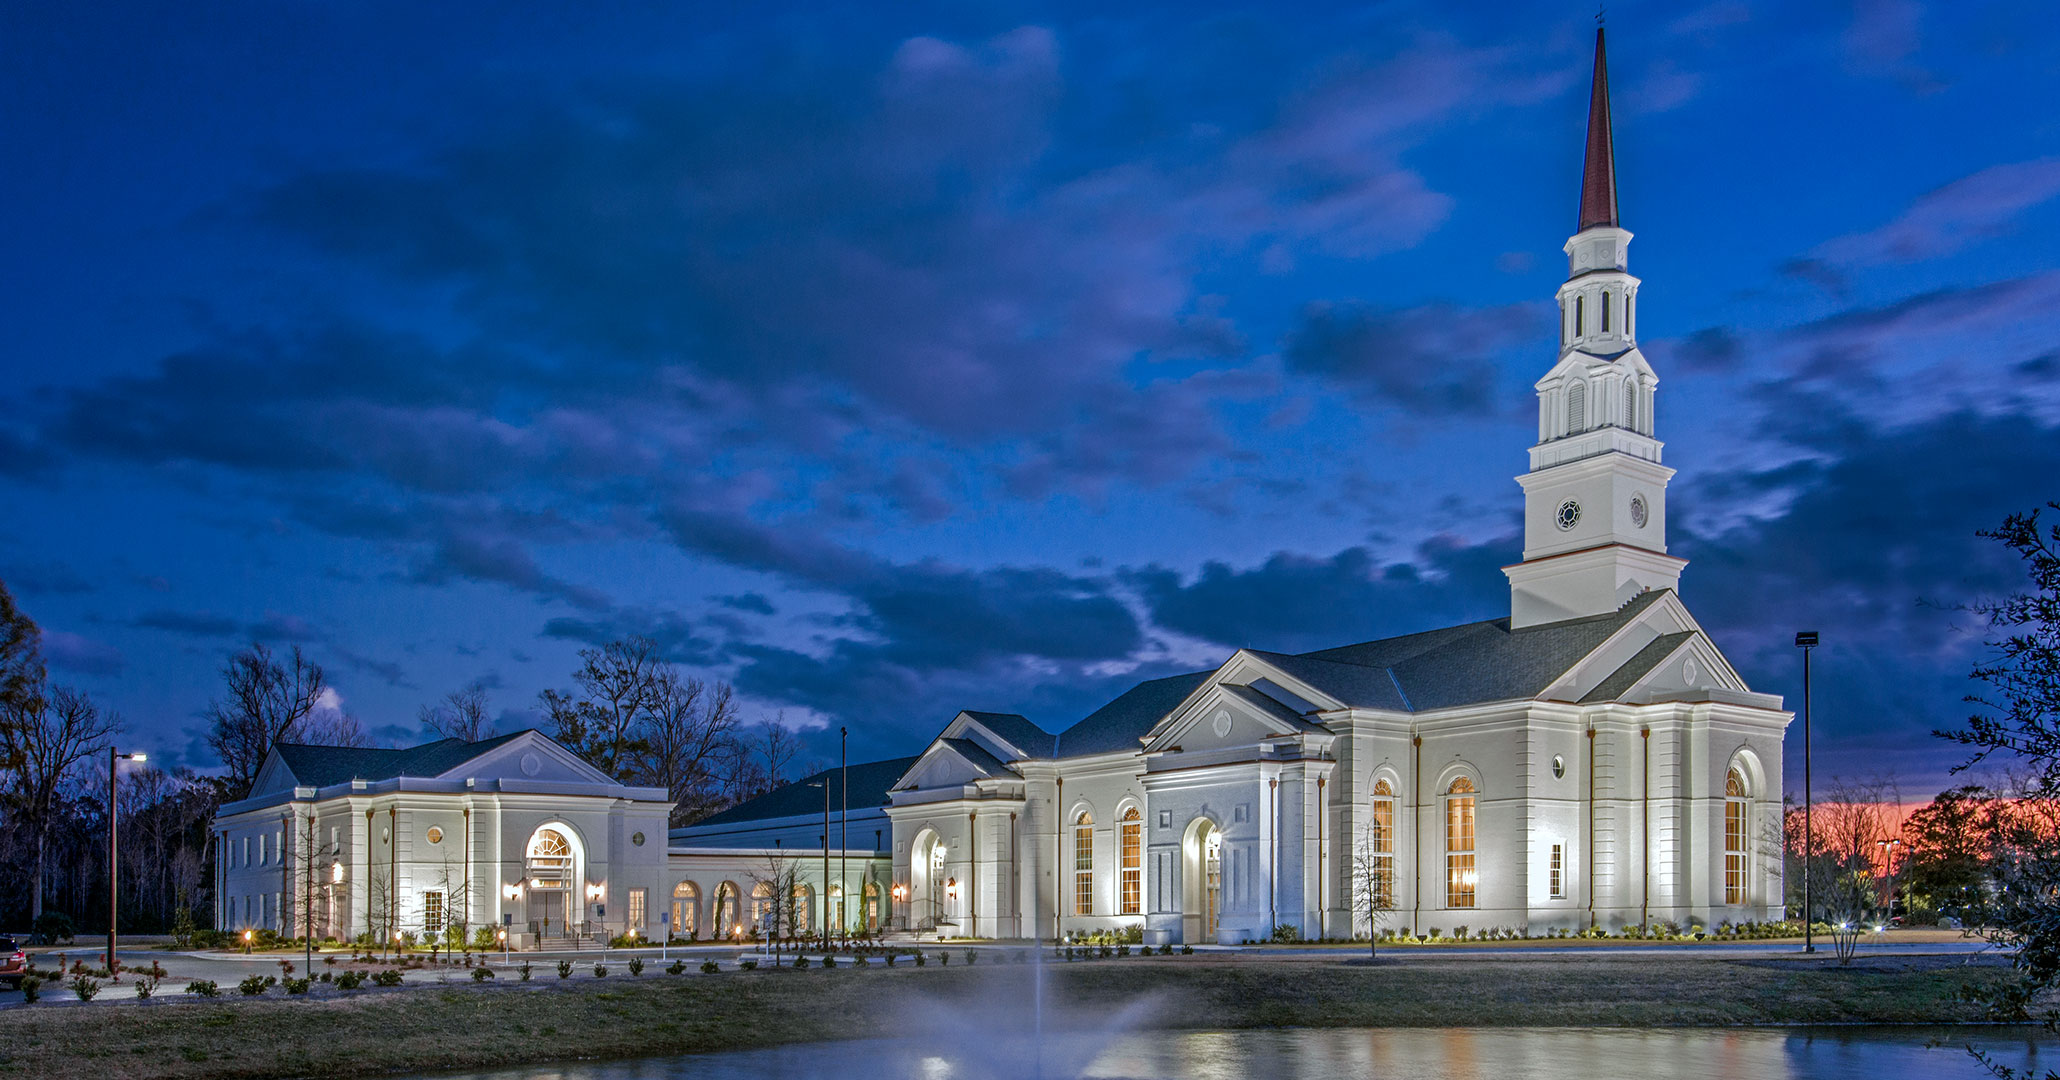 Boudreaux worked with First Presbyterian Church in Myrtle Beach, SC to design church exteriors.